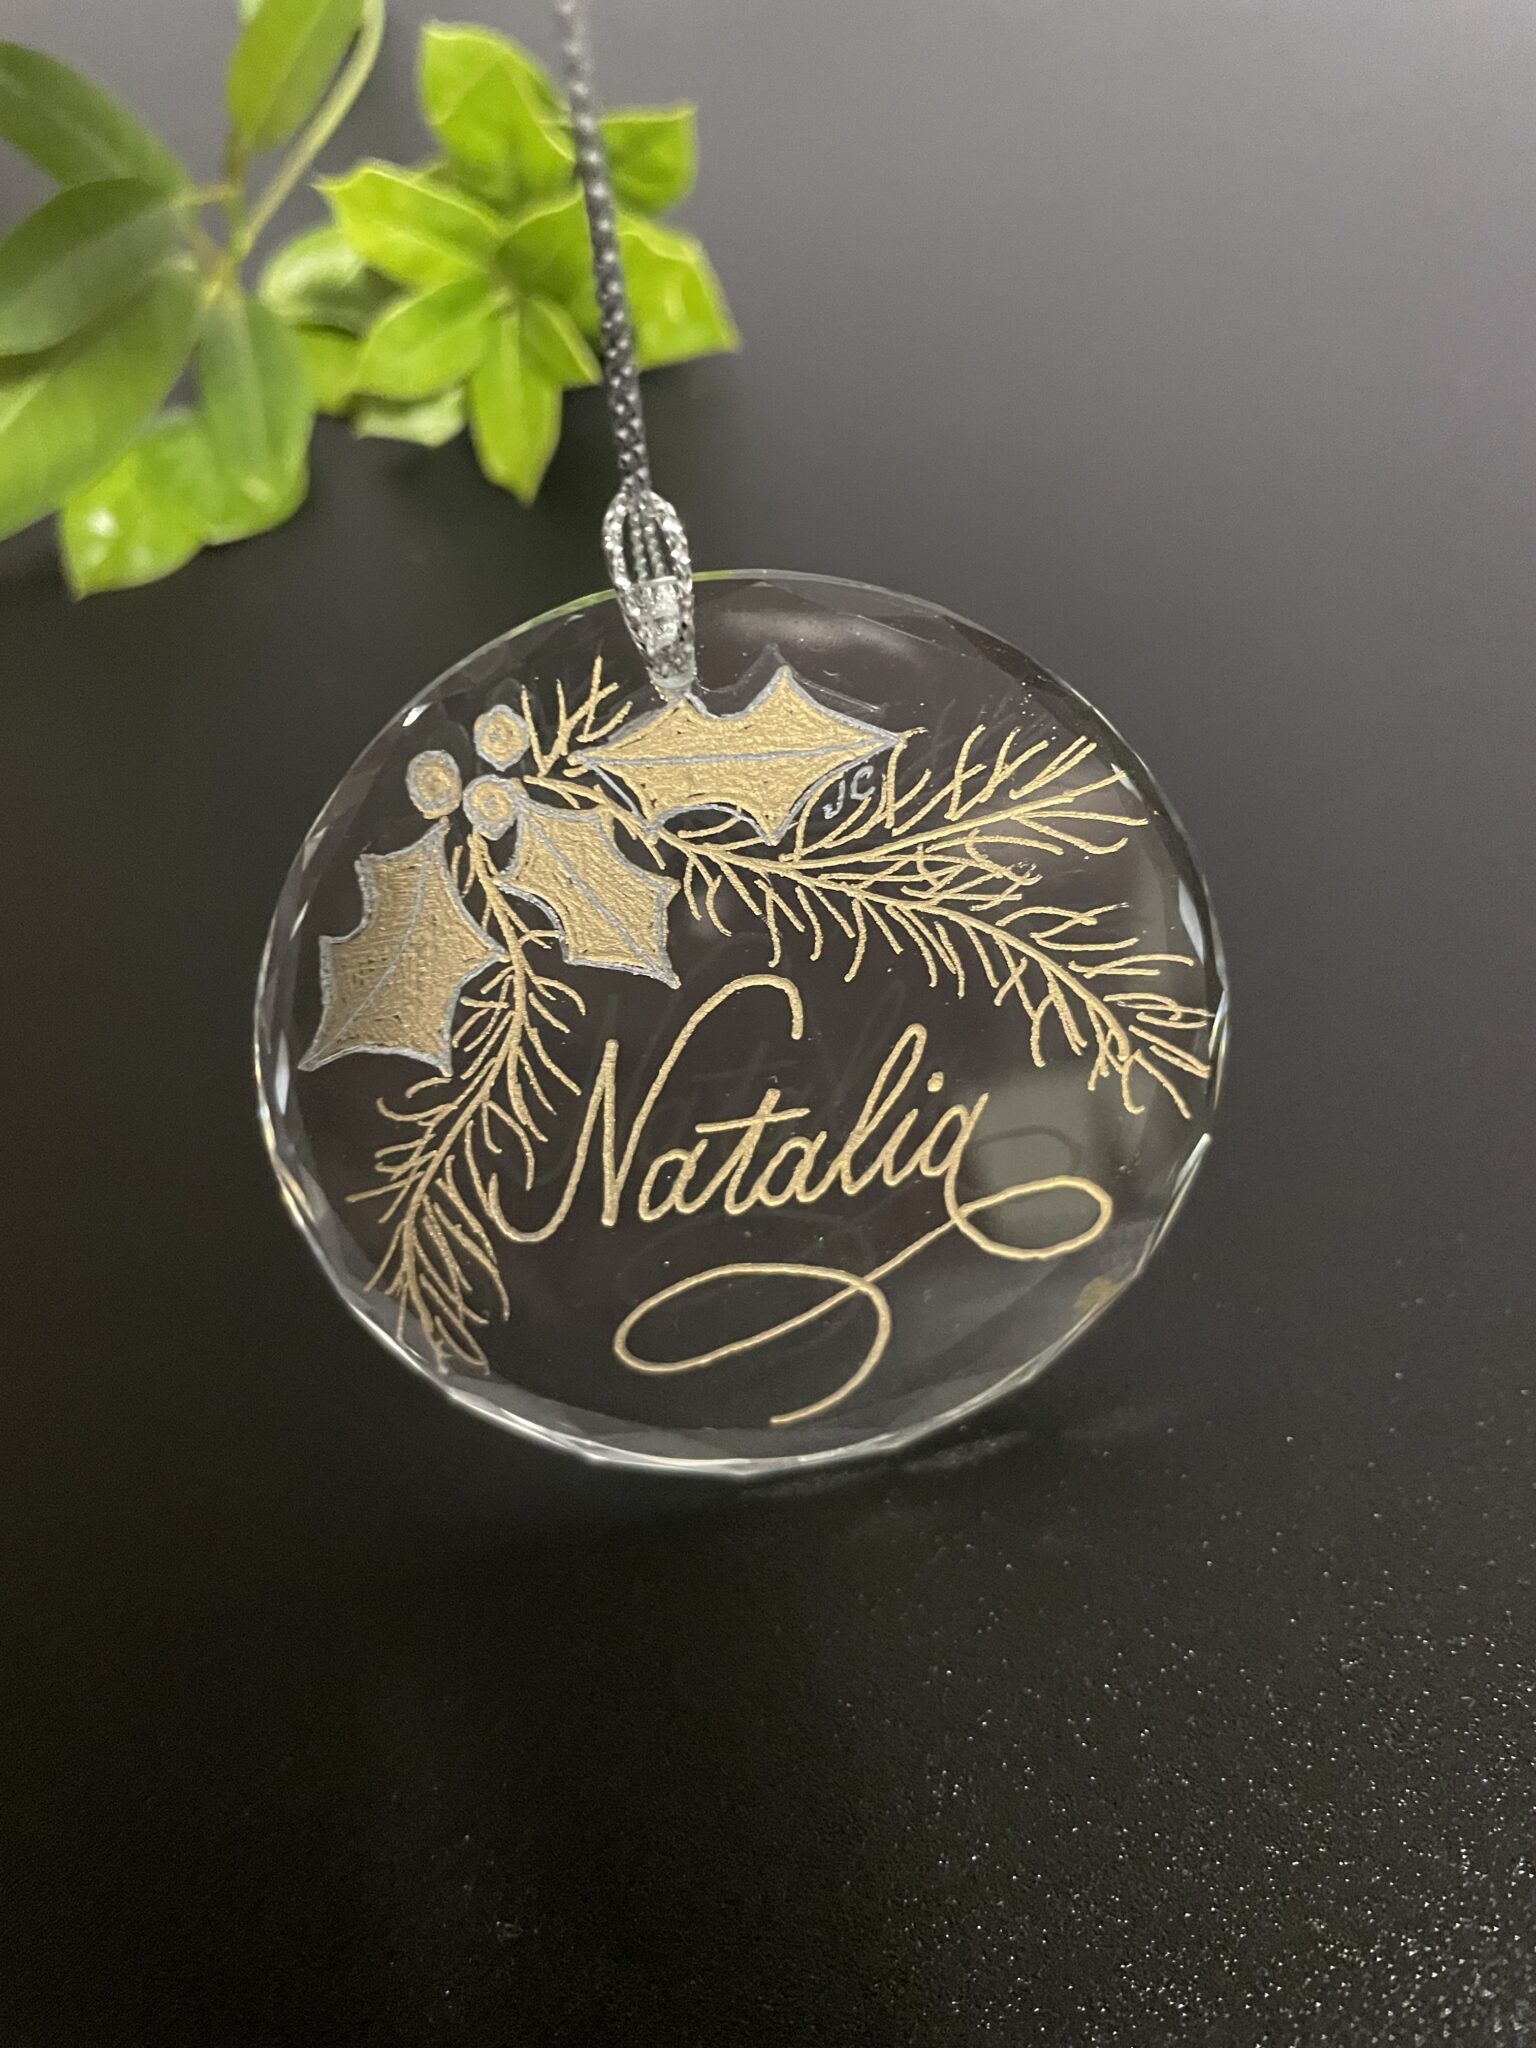 Round, crystal ornament with name "Natalie" hand engraved